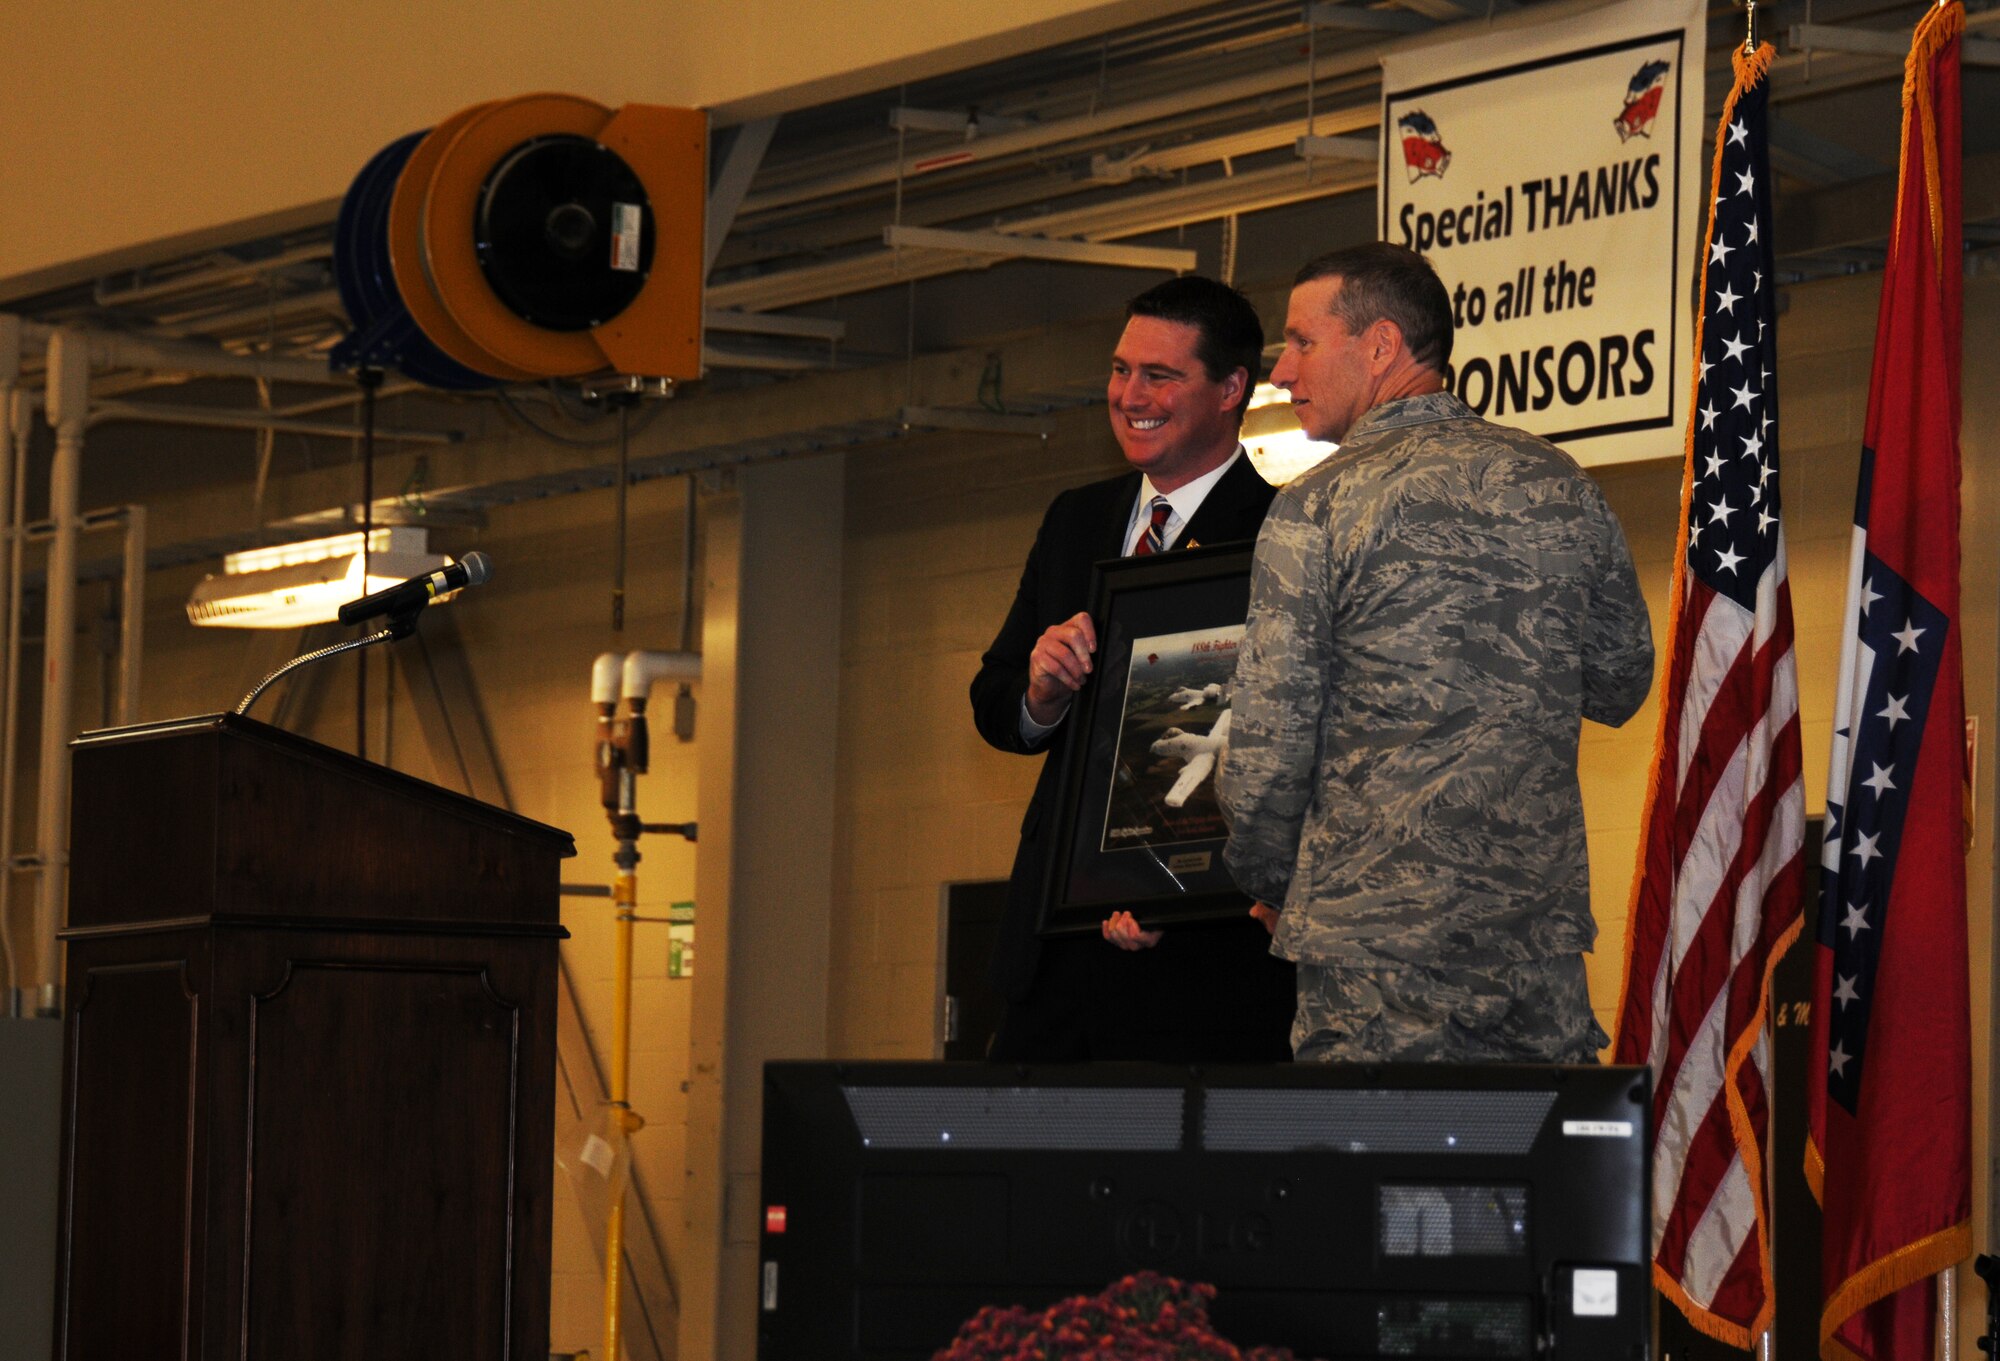 Col. Mark W. Anderson, 188th Fighter Wing commander, gives KFSM 5 News’ Garrett Lewis an Honorary Flying Razorback picture at the wing’s 60th anniversary celebration Nov. 2, 2013. Lewis, a meteorologist with the Fort Smith/Fayetteville CBS affiliate, was the event’s emcee. The 188th hosted a 60th anniversary jubilee in its main hangar to celebrate 60 years of excellence. The 188th marked 60 years as an Air National Guard unit Oct. 15. The unit began as the 184th Tactical Reconnaissance Squadron in 1953. Current and former unit members as well as Congressional, city and civic leaders attended the event. (U.S. Air National Guard photo by Airman 1st Class Cody Martin/188th Fighter Wing Public Affairs)